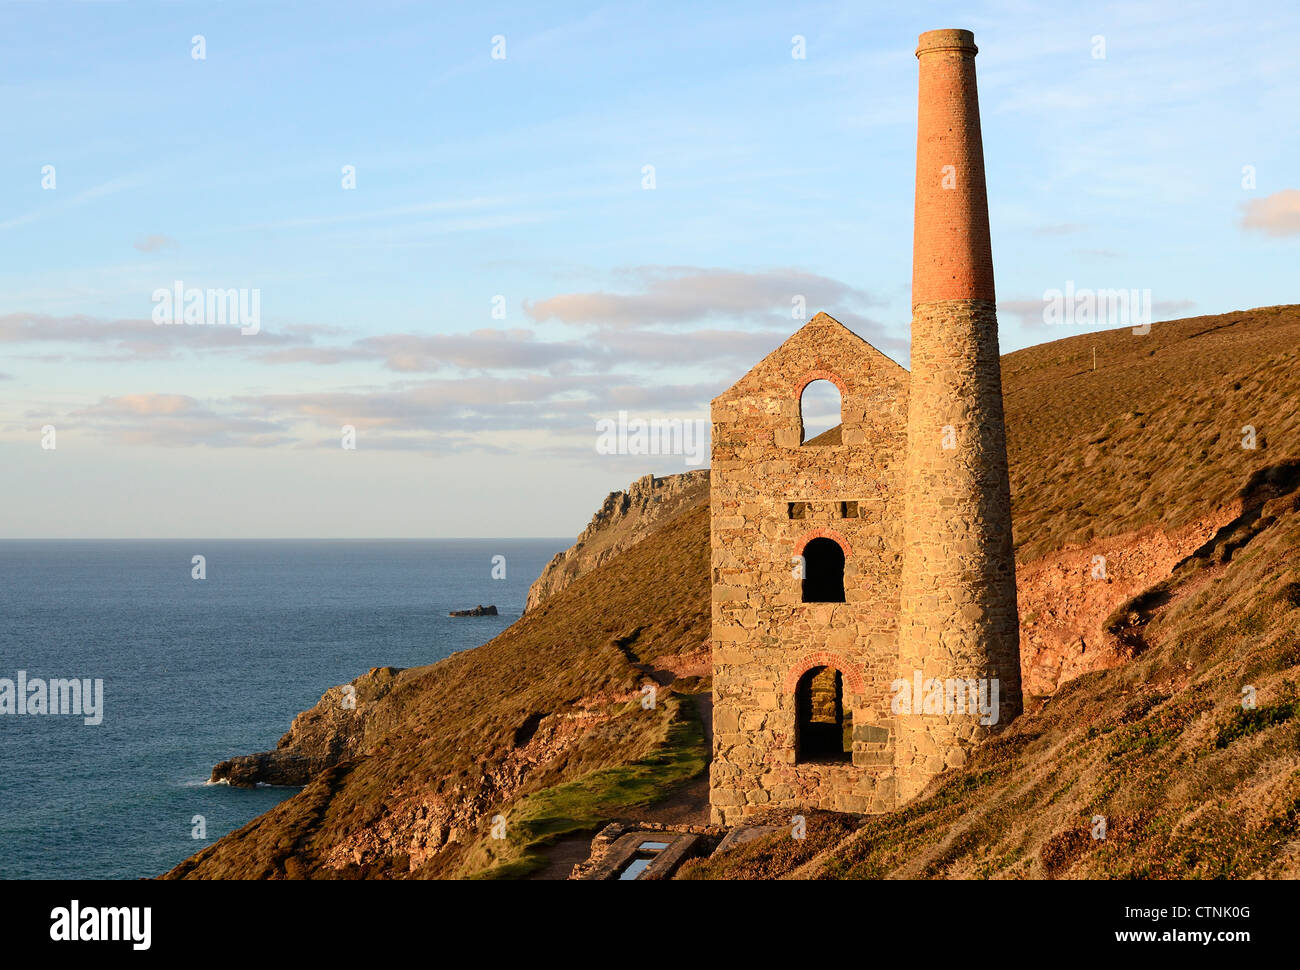 The old Towanroath engine house on the coastal cliffs near St.Agnes in Cornwall, UK Stock Photo